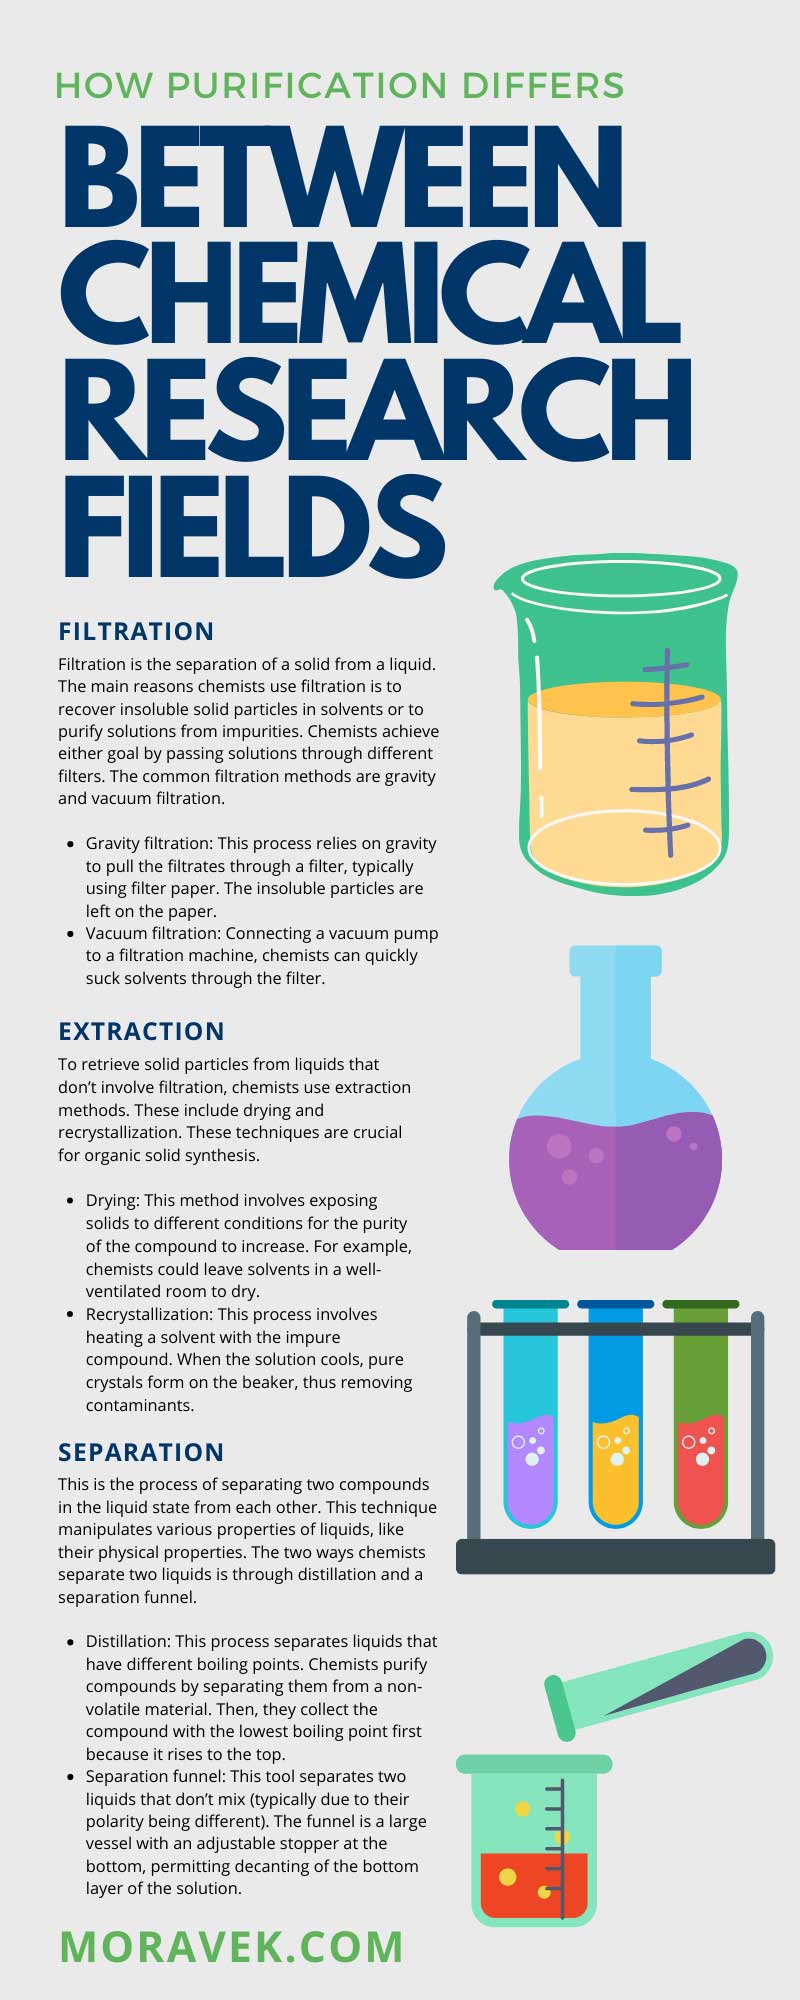 How Purification Differs Between Chemical Research Fields